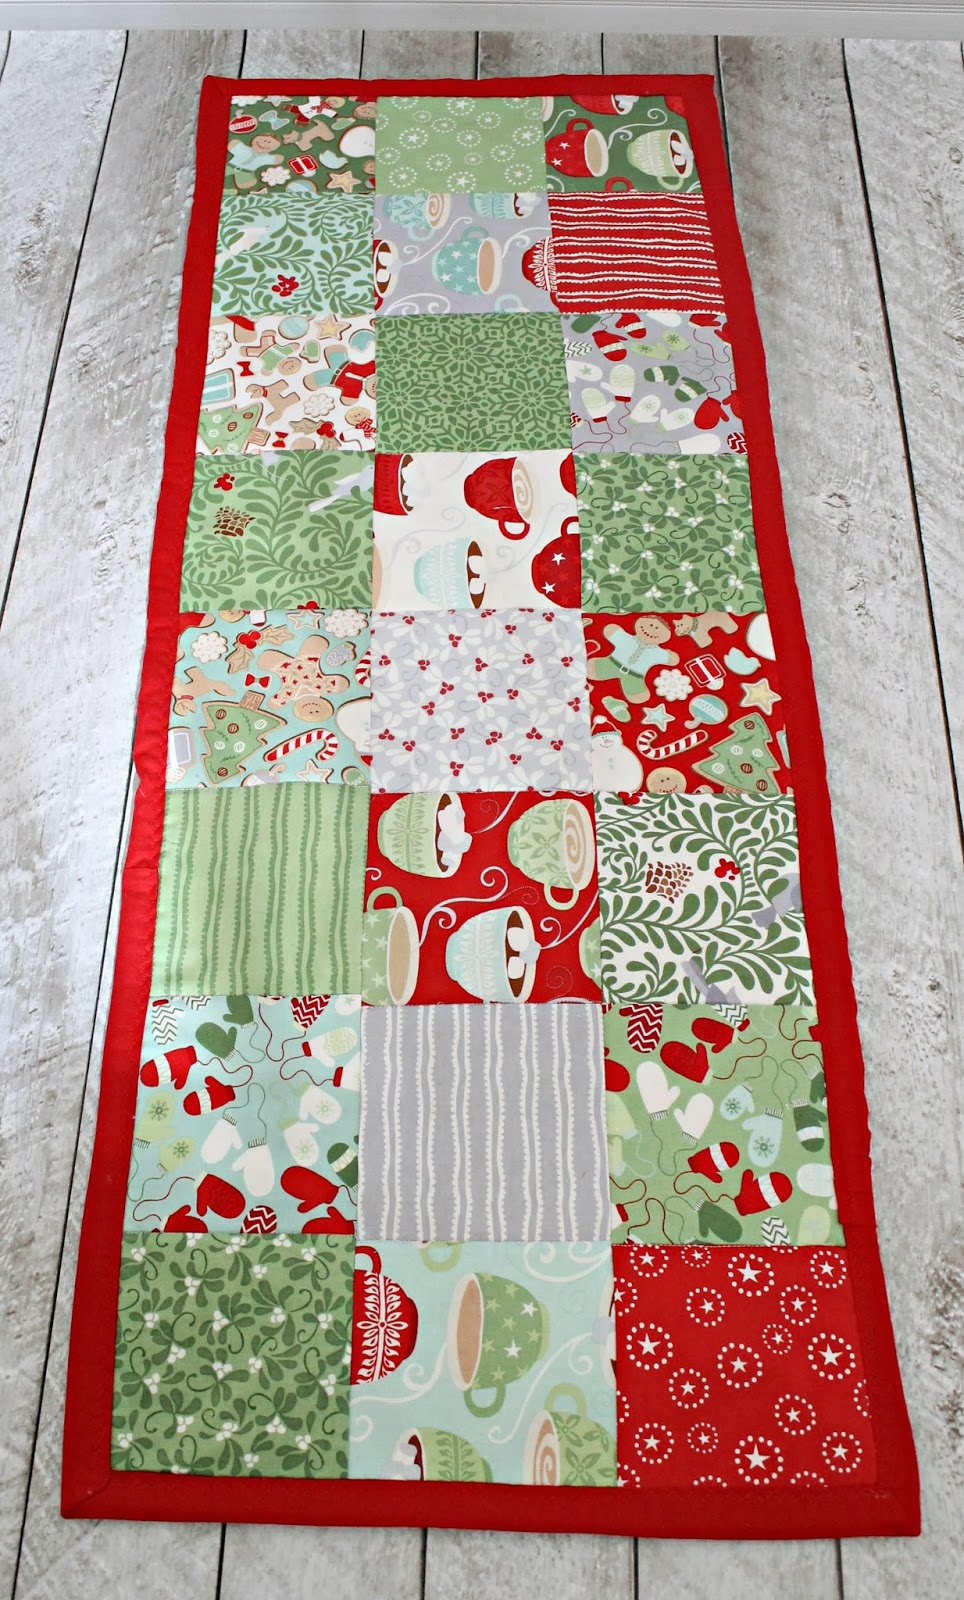 How to make a simple table runner